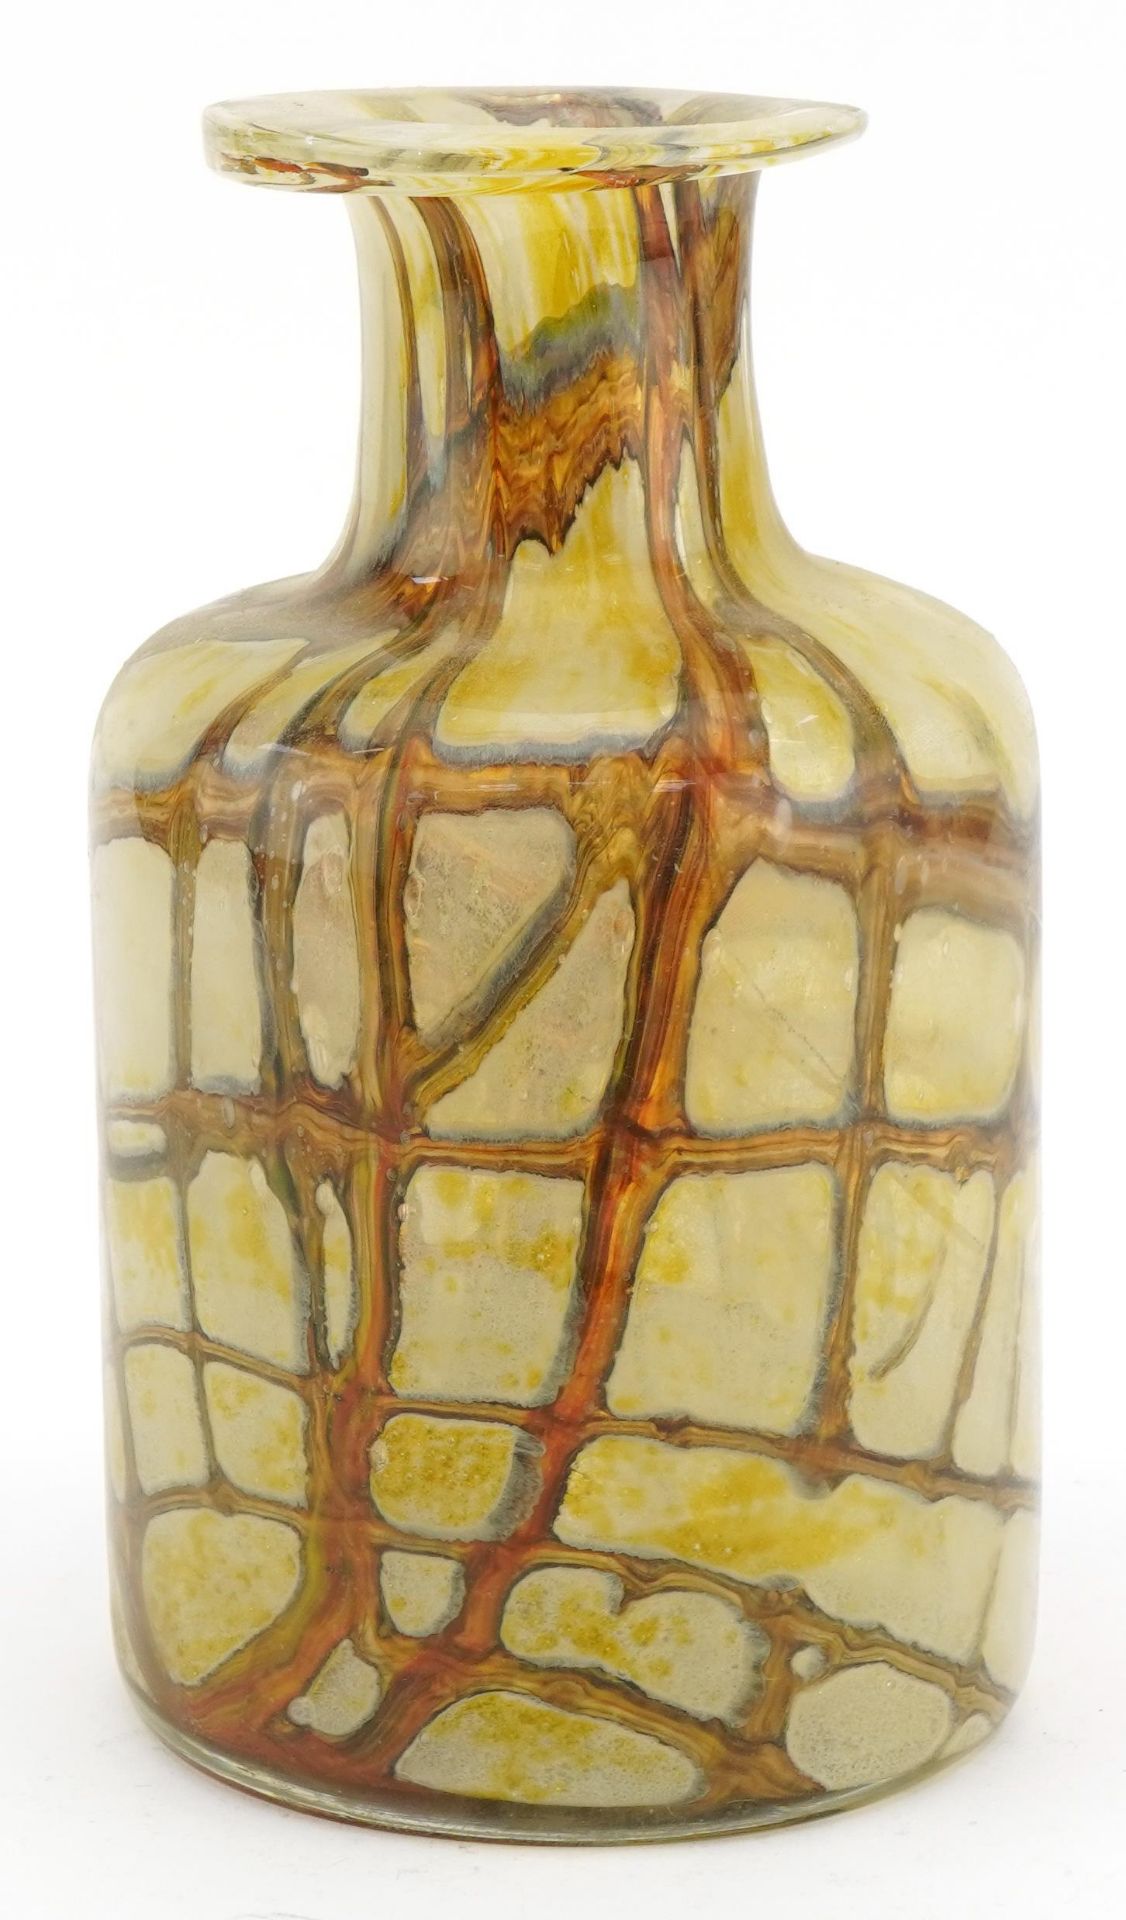 Attributed to Mdina, large mottled mallet art glass vase, Maltese paper label to the base, 23cm high - Image 2 of 4